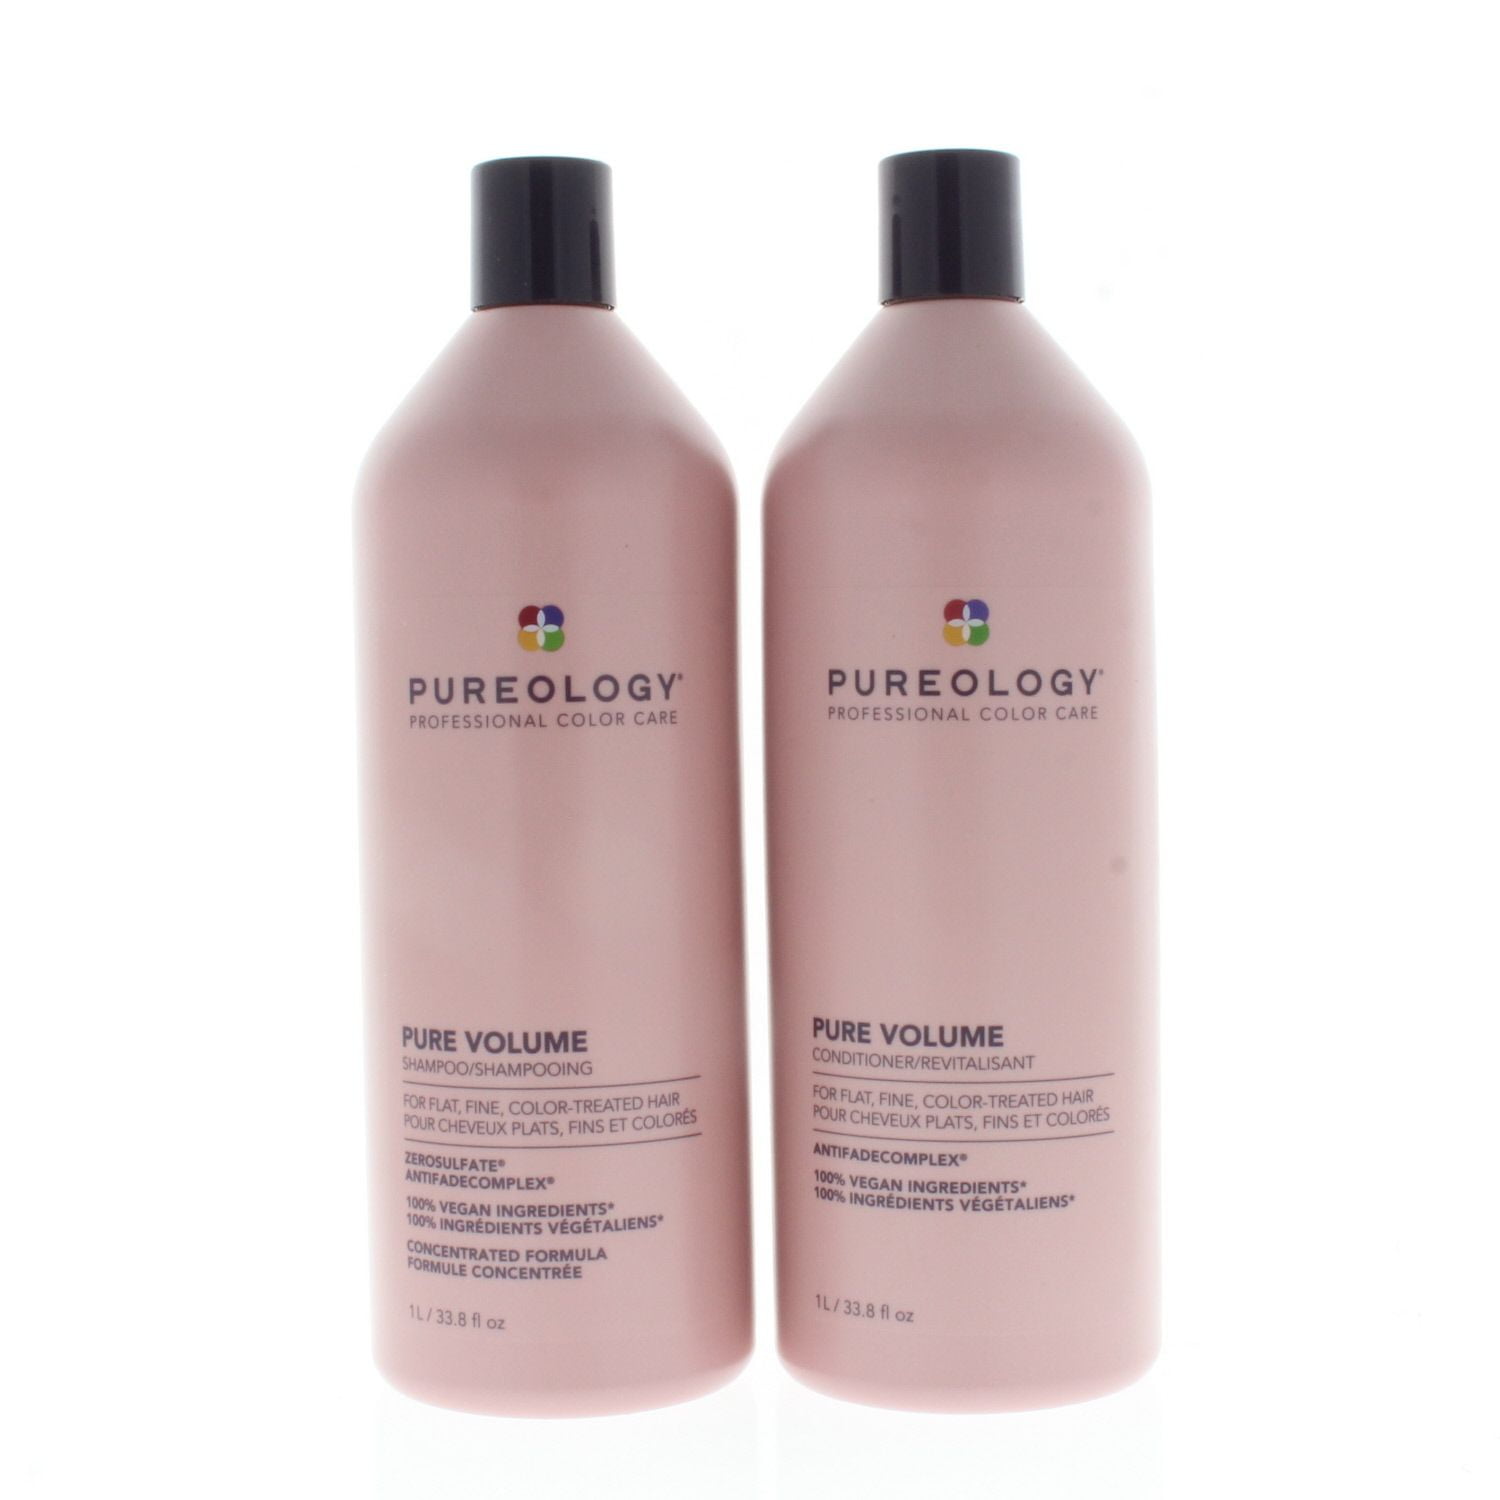 Pureology Pure Volume Shampoo and Conditioner Duo, 33.8 oz each ...